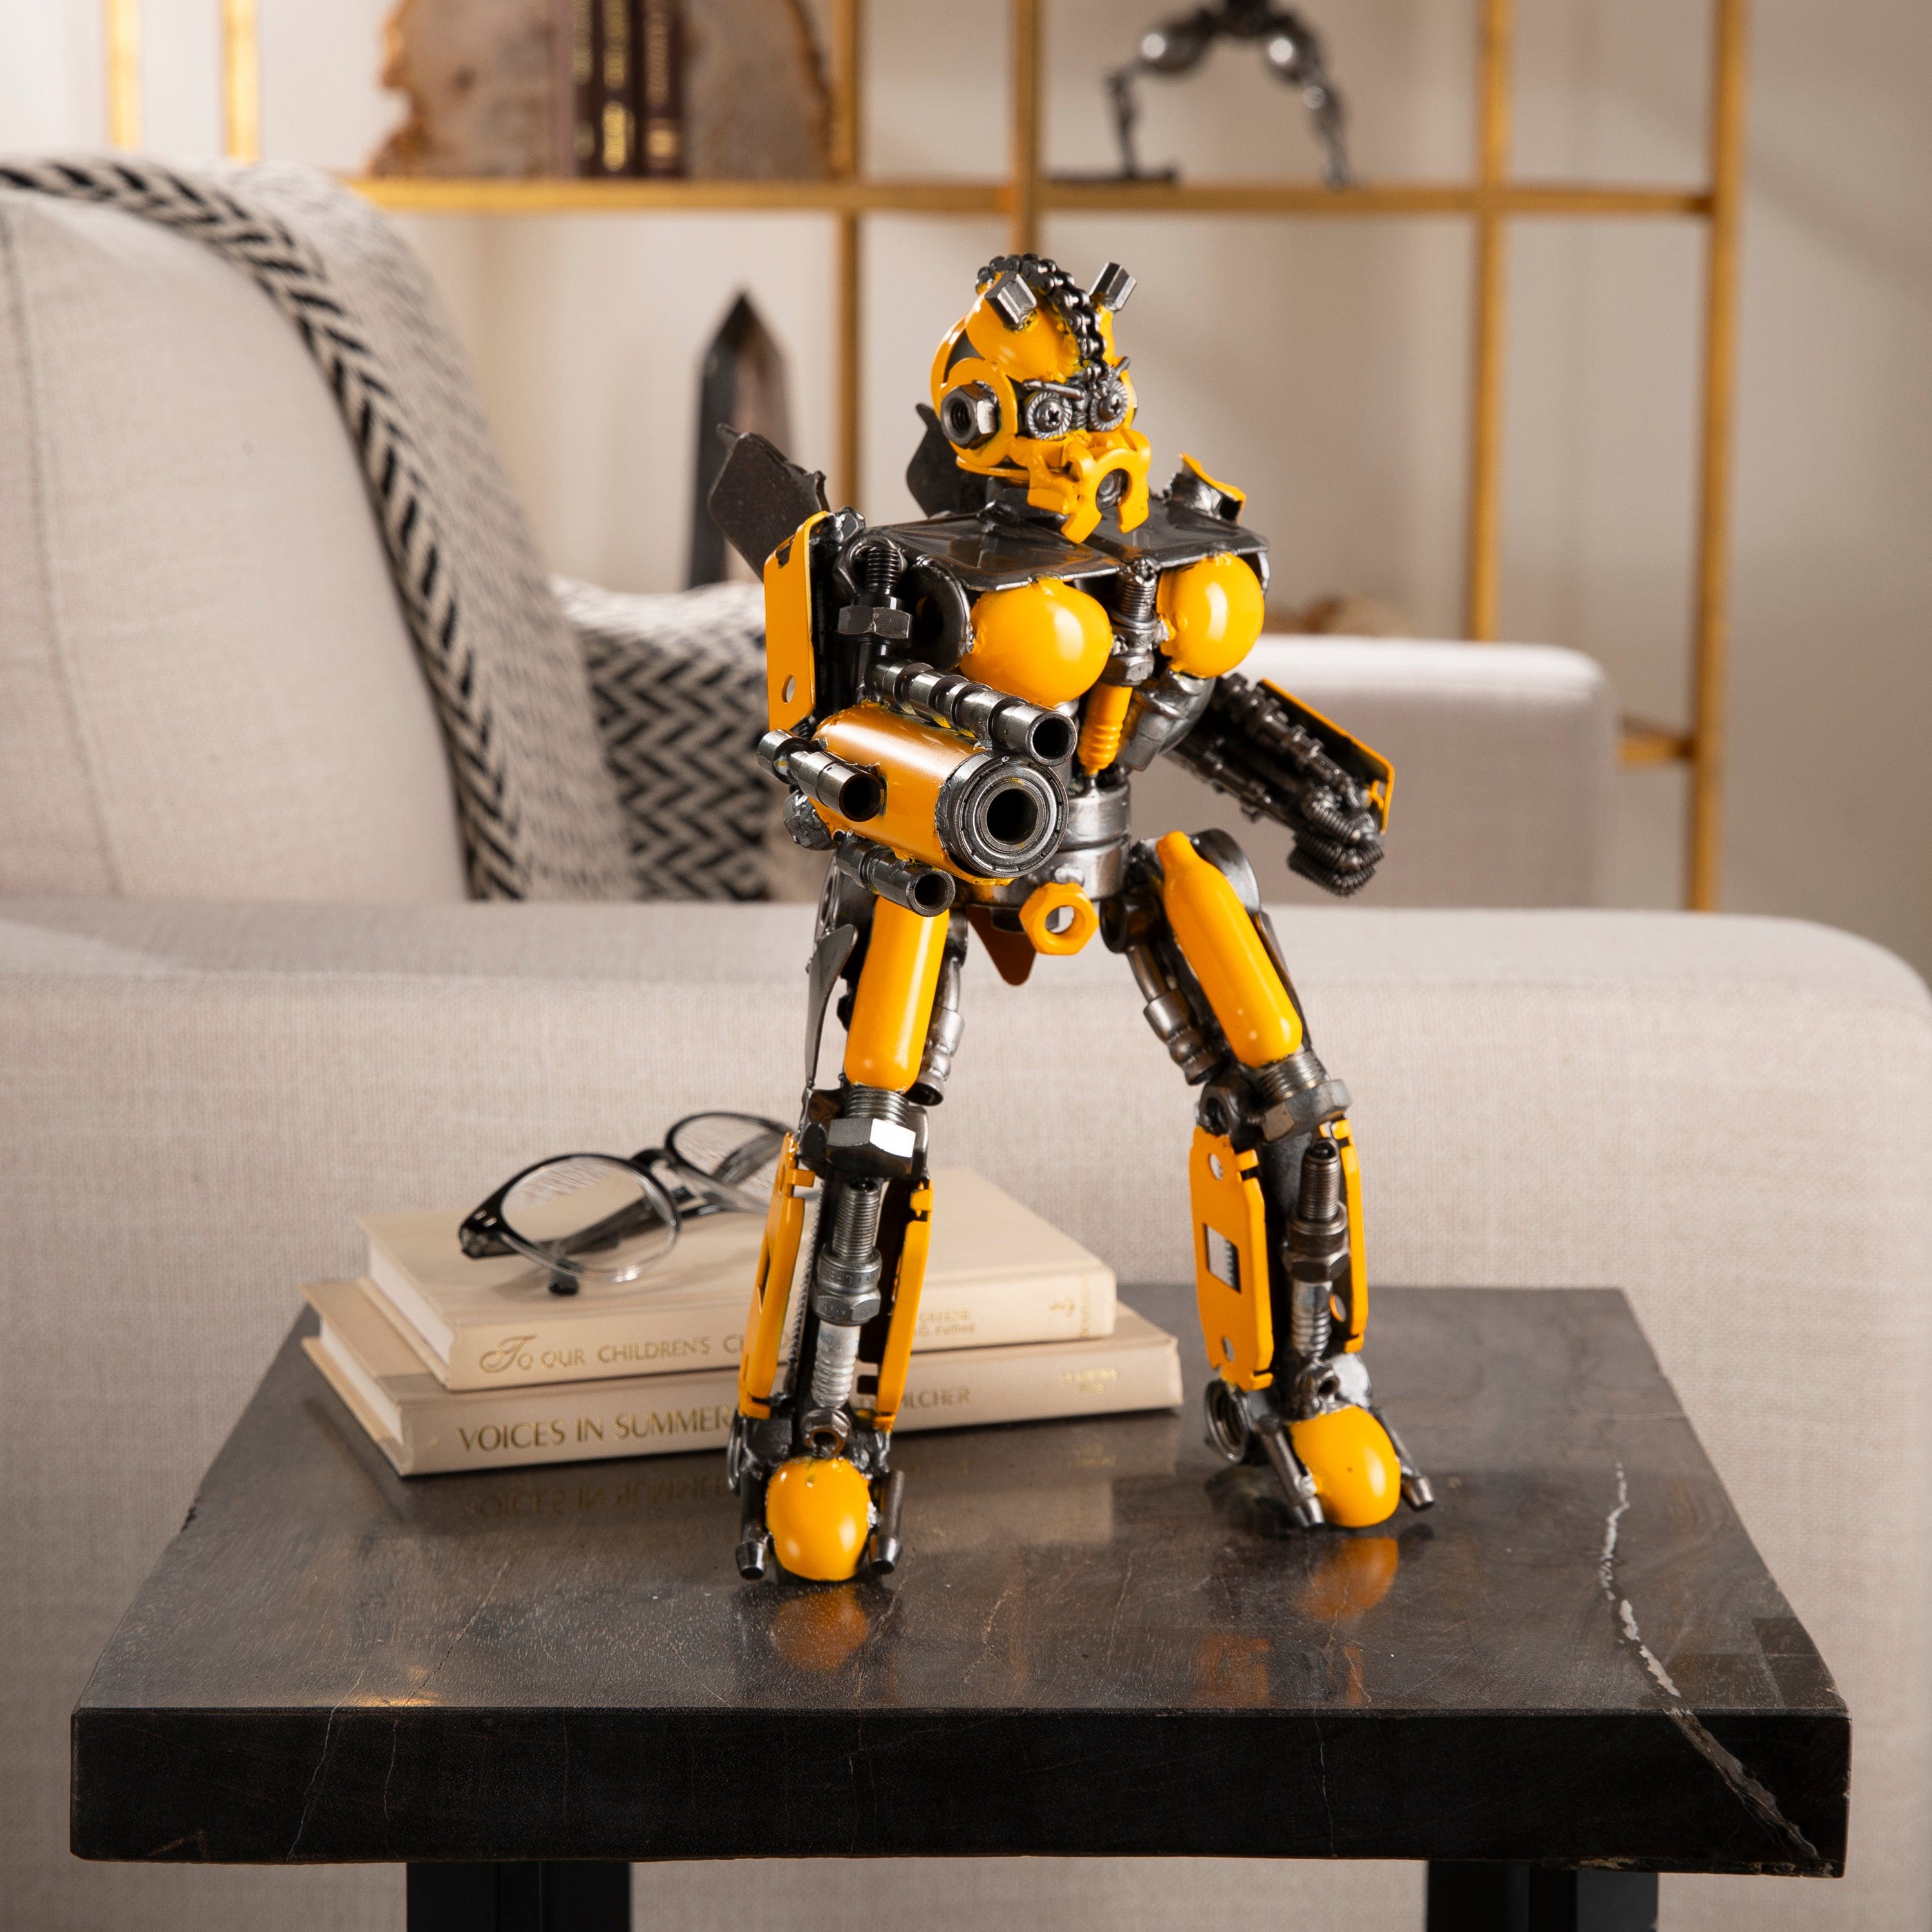 Kalifano Recycled Metal Art 14" BumbleBee Inspired Recycled Metal Sculpture RMS-BB35x26-S